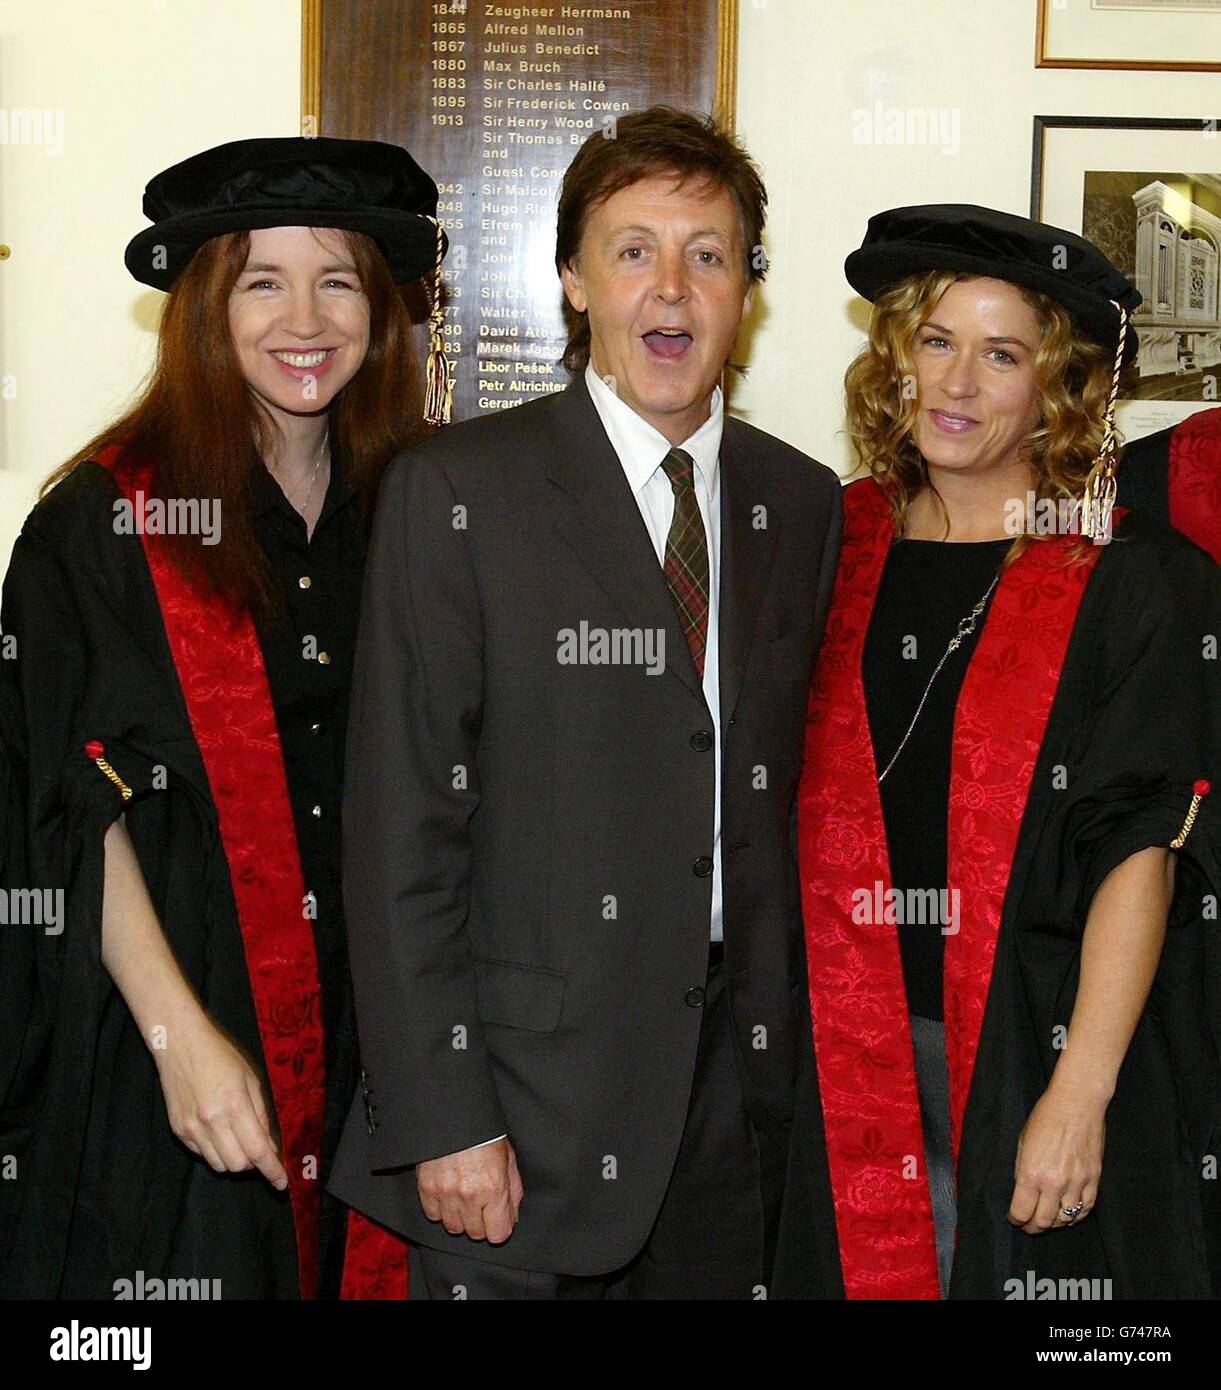 Sir Paul McCartney with two members of the band The Bangles, Vicki Peterson (right) and Michael Steele, who where made companions of the Liverpool Institute for Performing Arts during a ceremony, at The Liverpool Philharmonic Hall, for thier contribution to arts and entertainment and for sharing expertise with LIPA students. Stock Photo